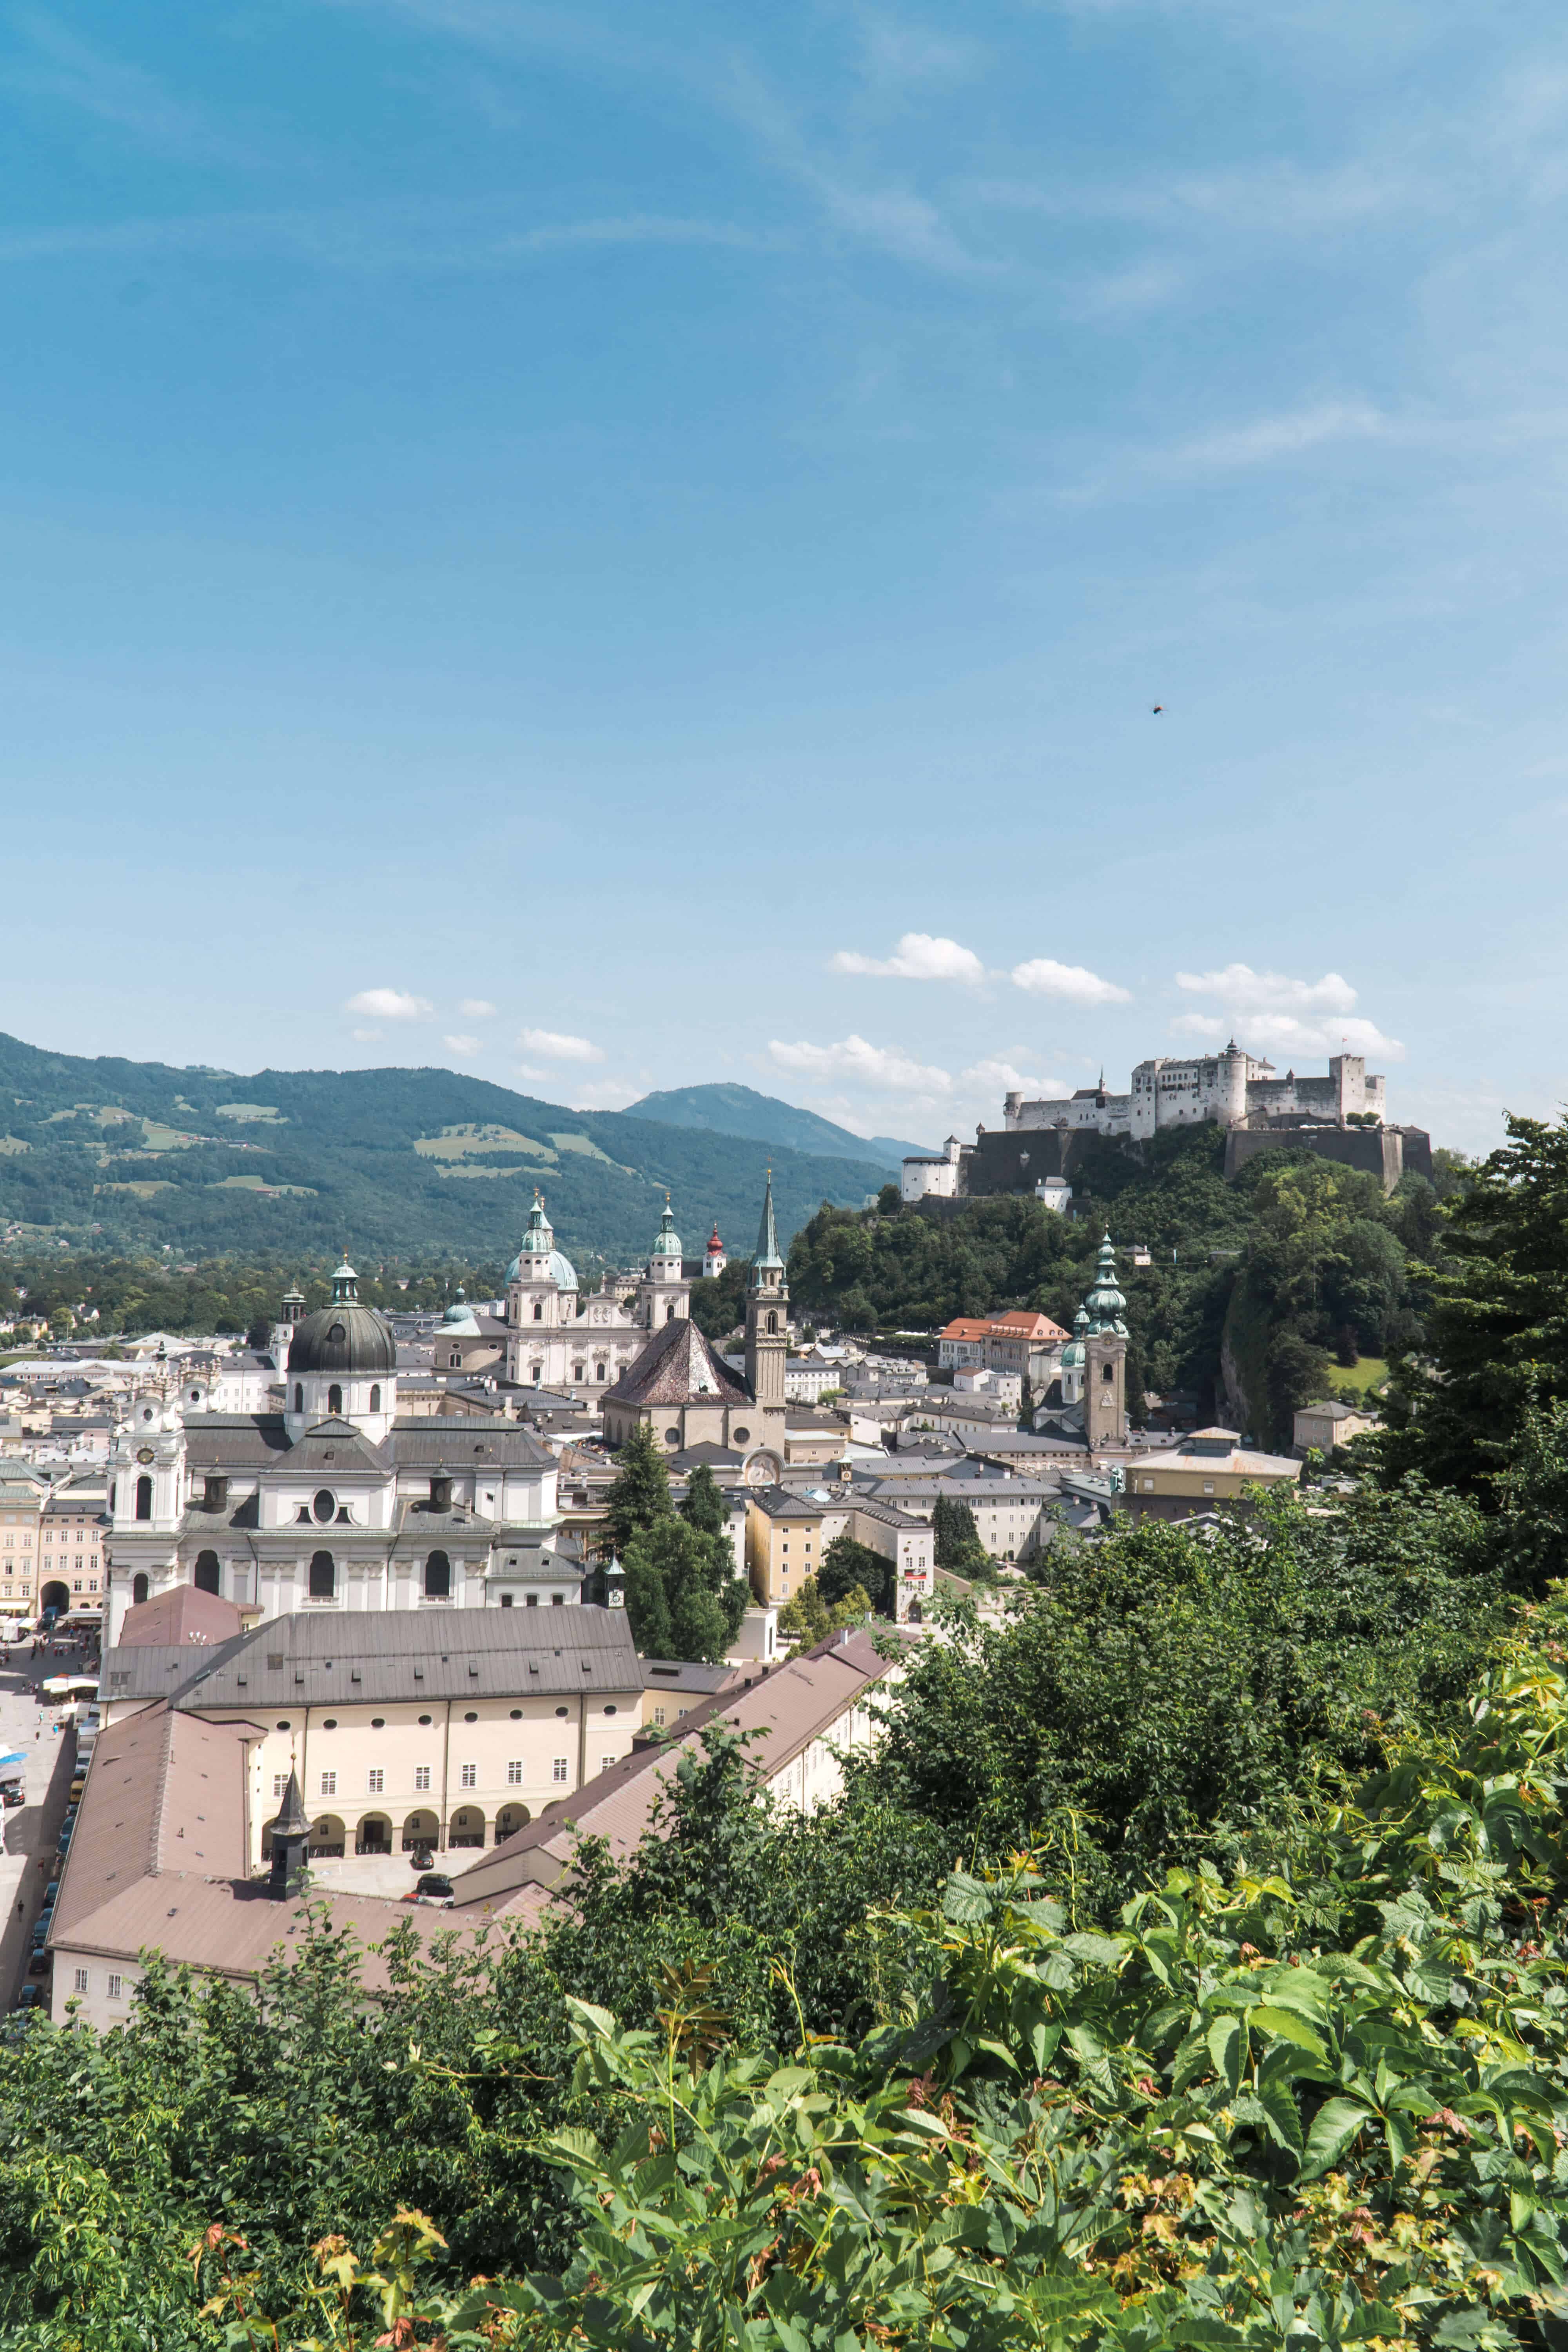 How to Spend One Day in Salzburg Austria | View of the Salzburg Fortress | The Republic of Rose | #Travel #Salzburg #Austria #Europe